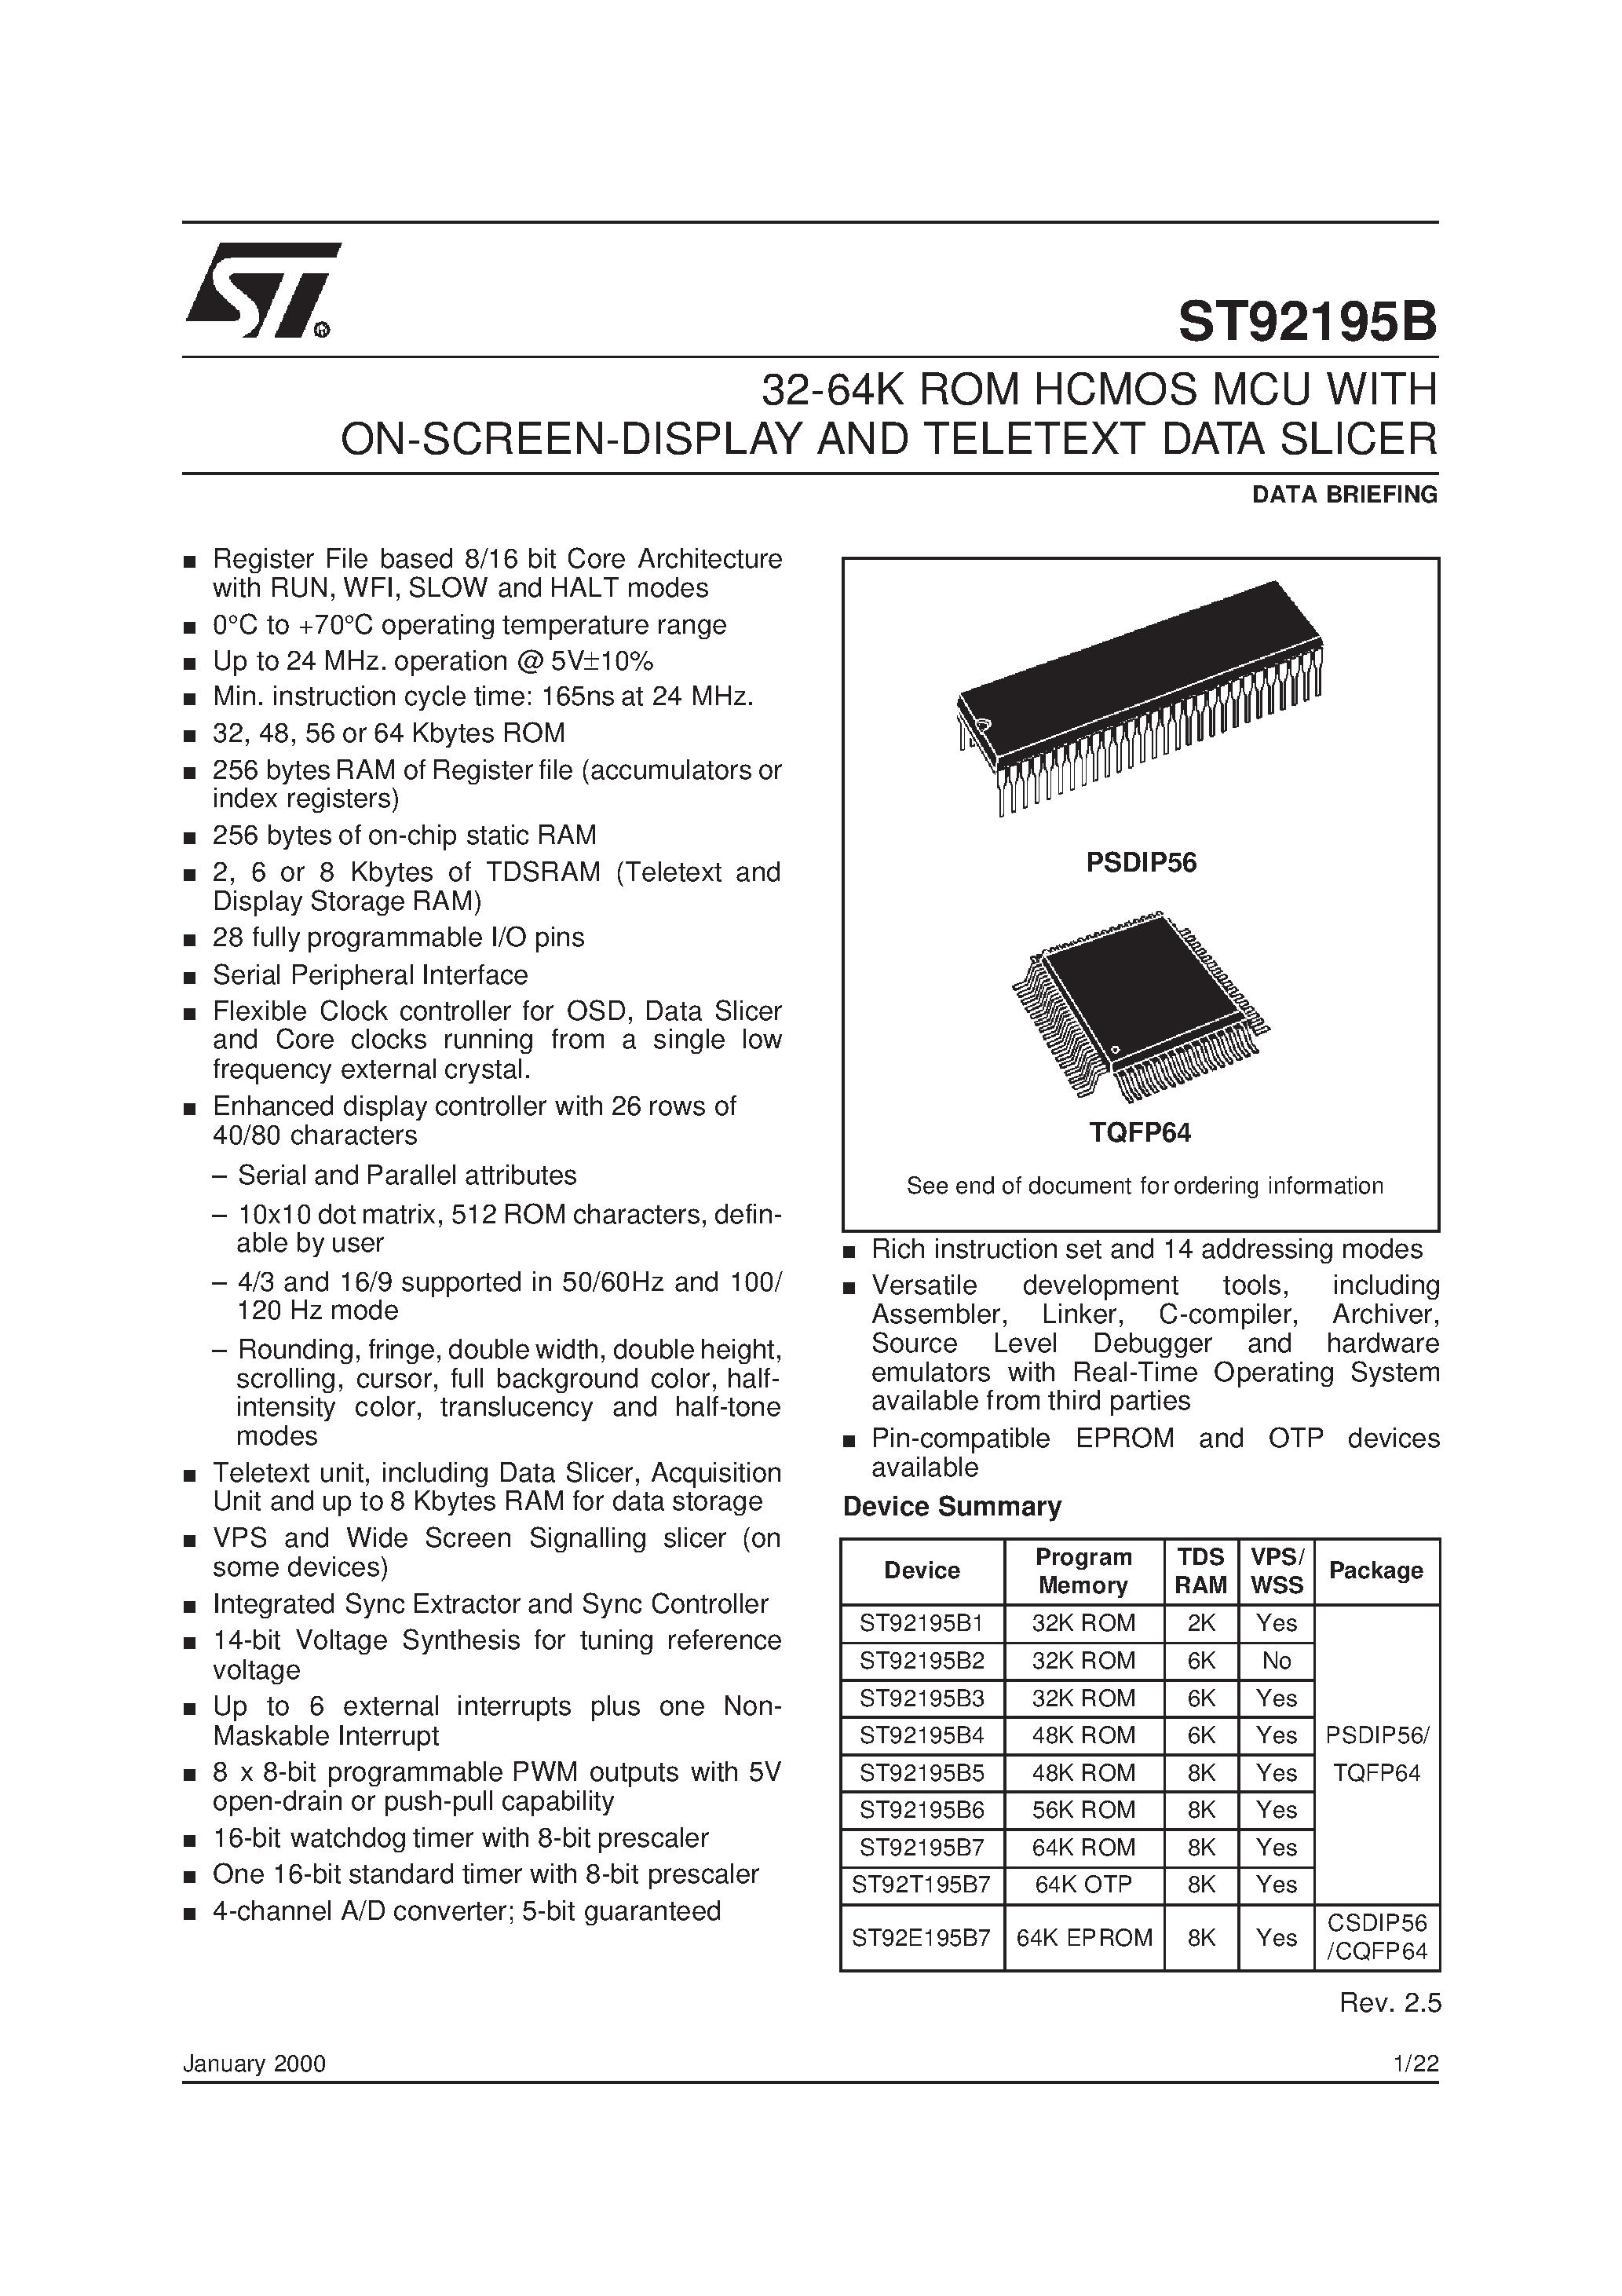 Datasheet ST92T195B - 32-64K ROM HCMOS MCU WITH ON-SCREEN-DISPLAY AND TELETEXT DATA SLICER page 1